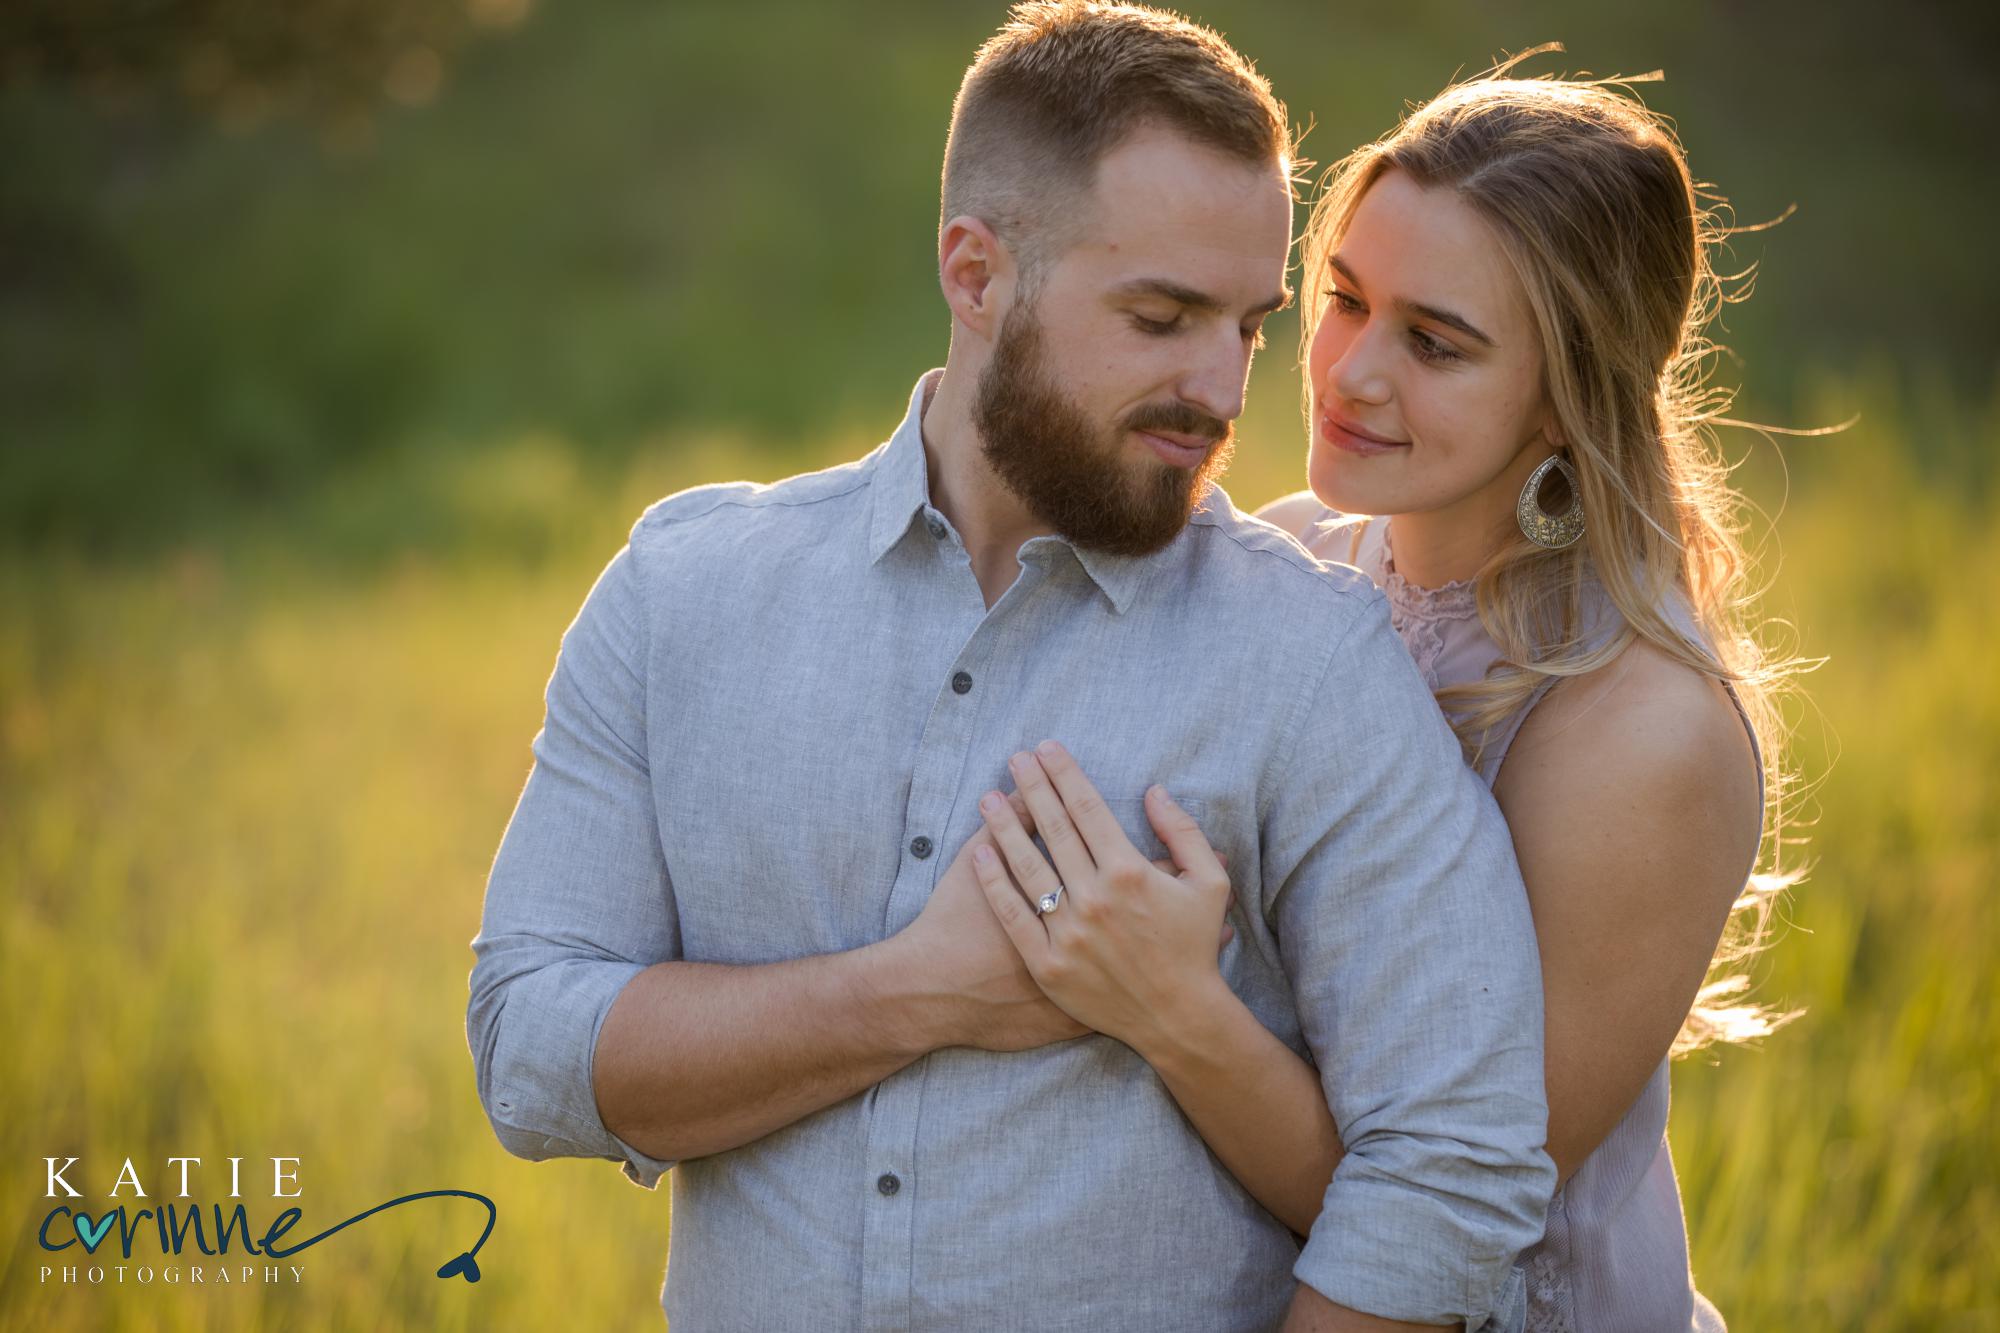 Engaged couple poses in family backyard